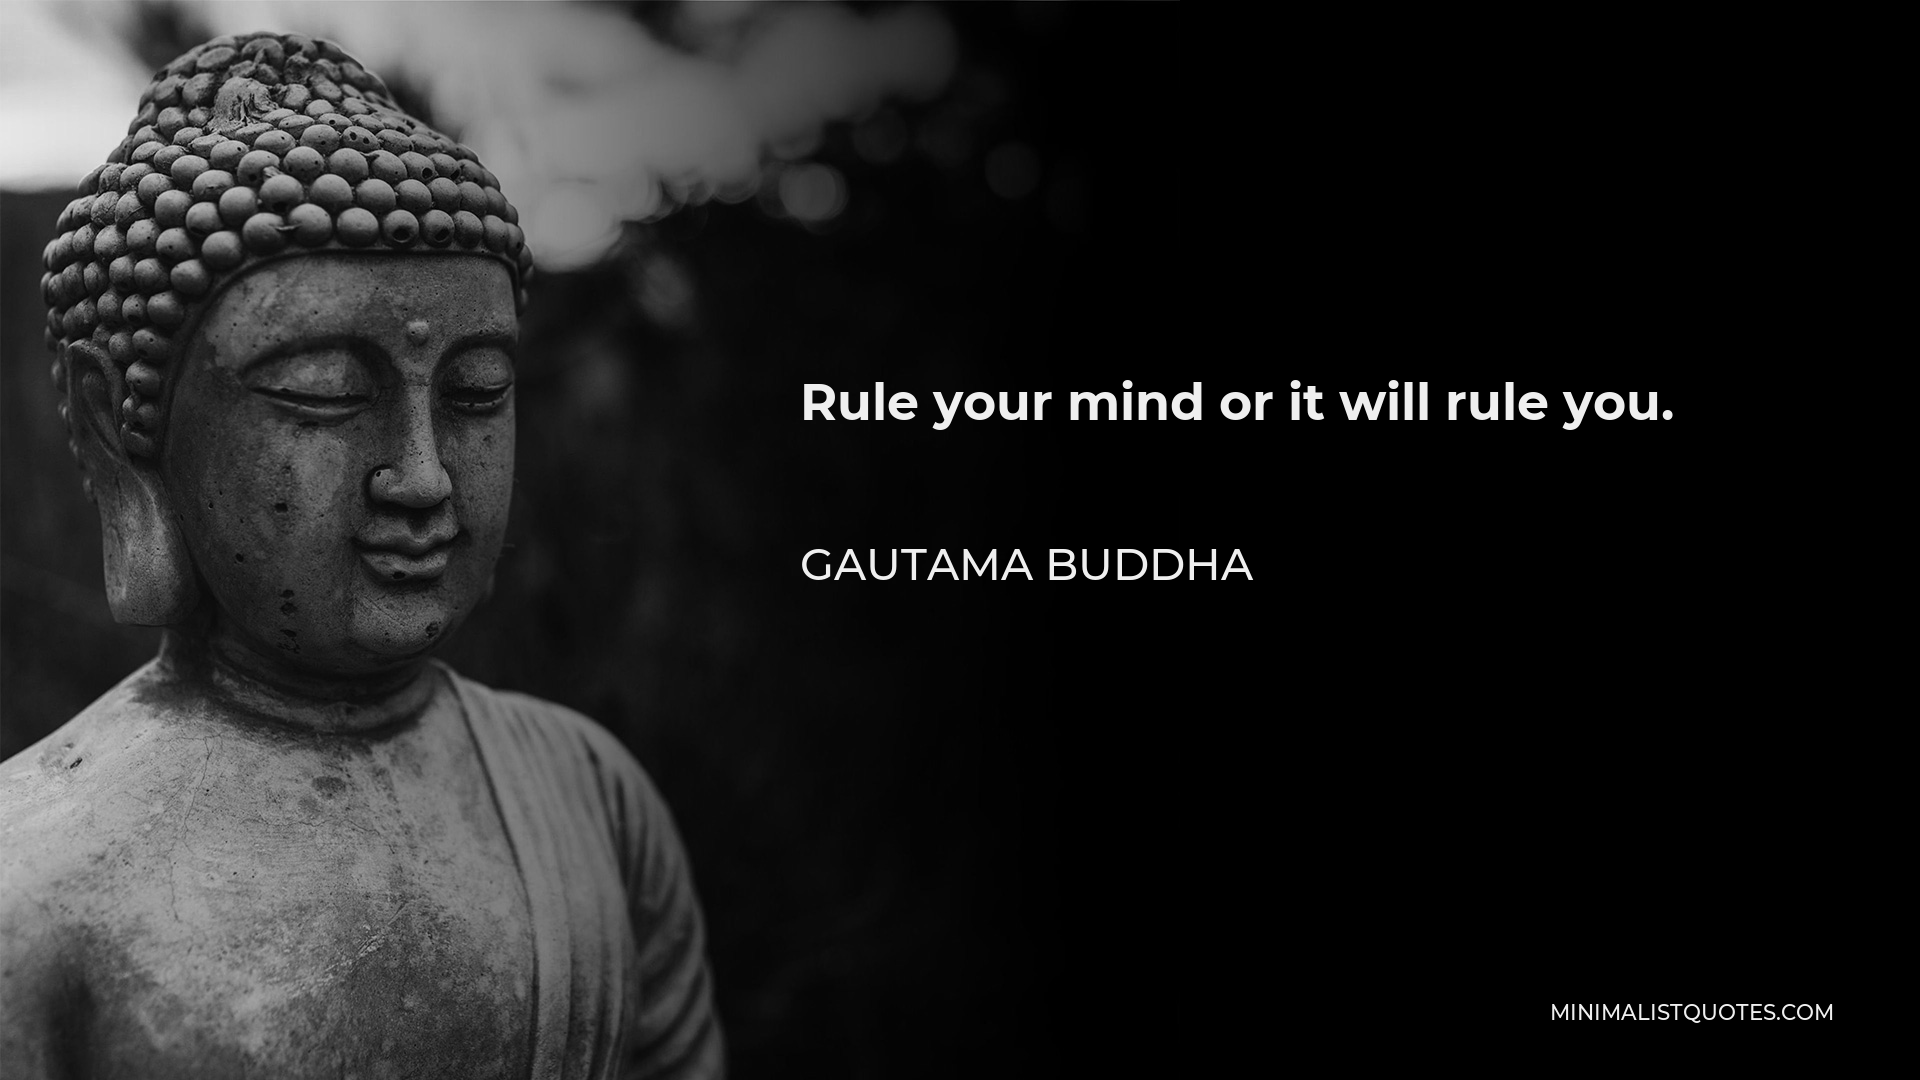 Gautama Buddha Quote - Rule your mind or it will rule you.